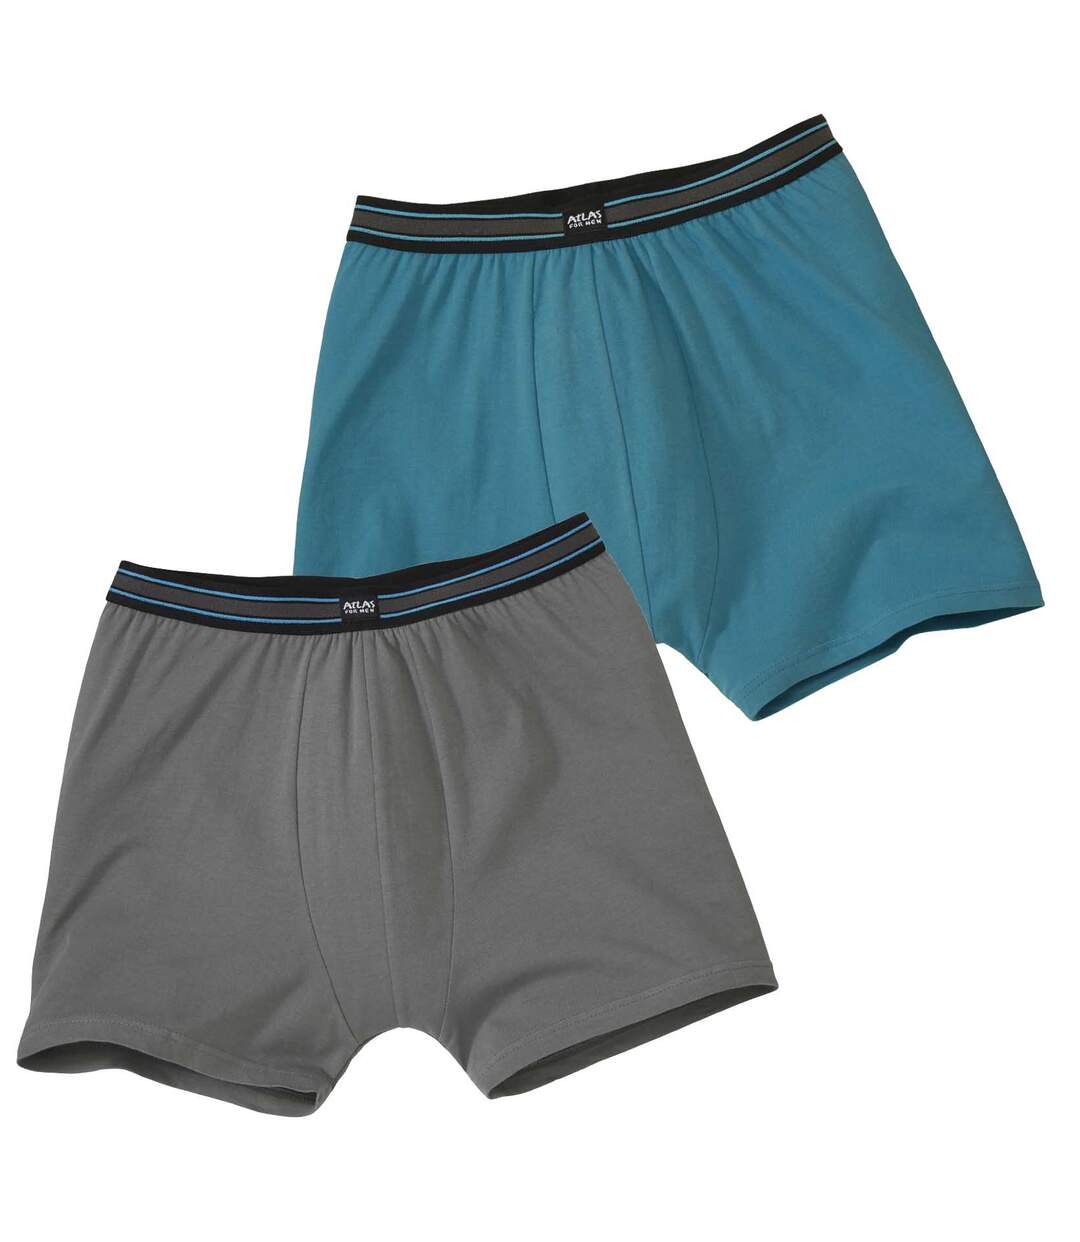 Pack of 2 Men's Monochrome Comfort Stretch Boxers - Turquoise Grey Atlas For Men